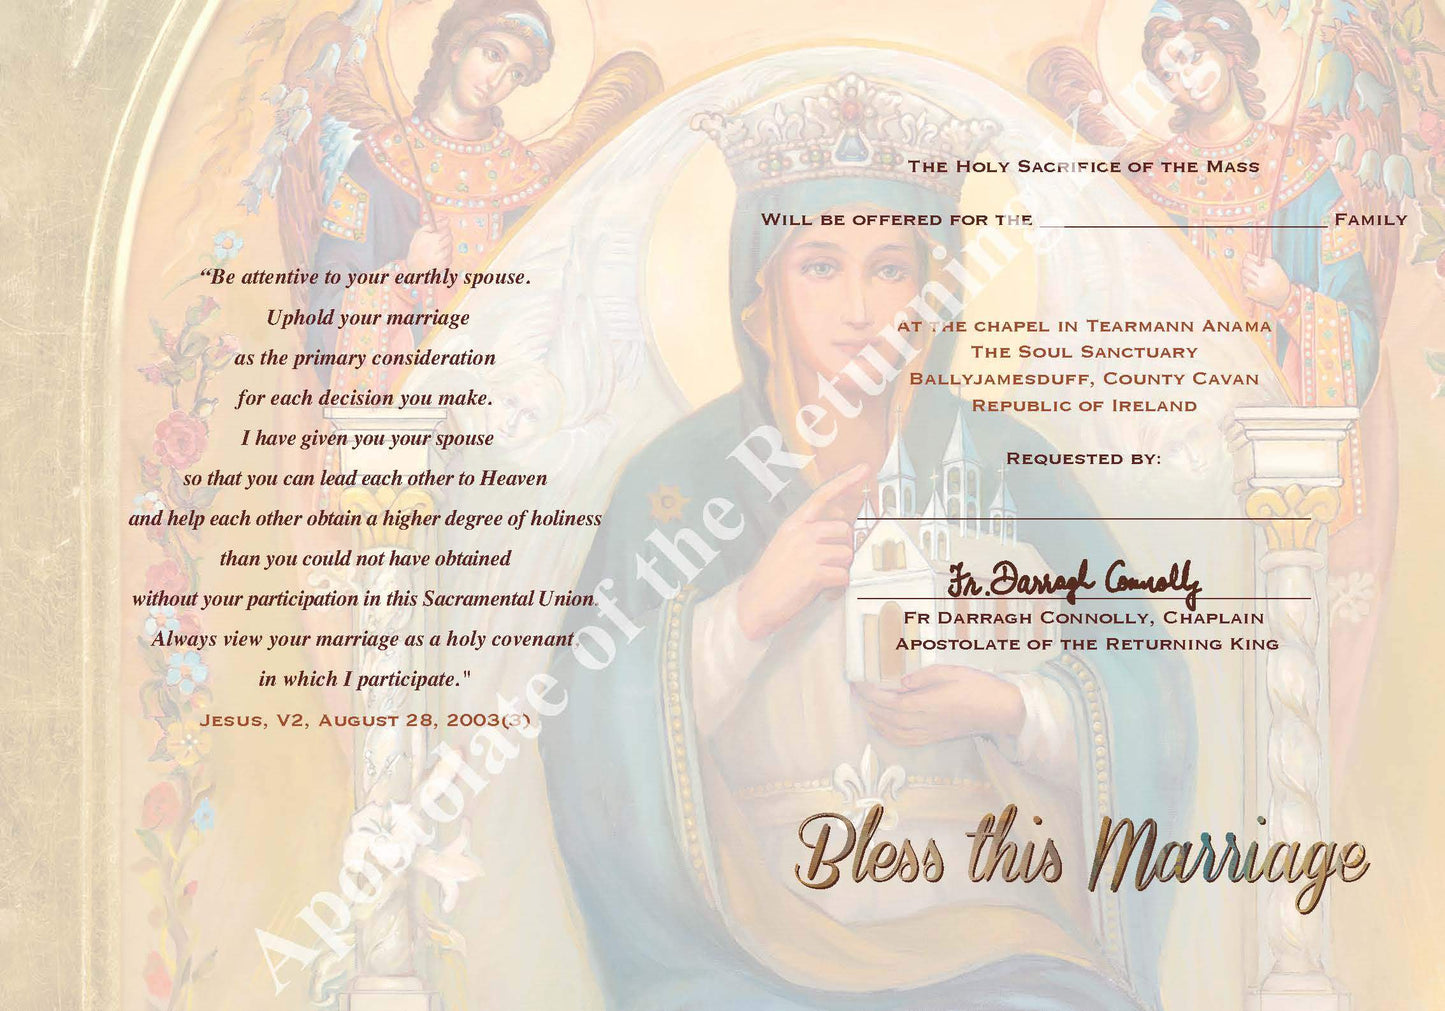 Bless This Marriage Mass Card